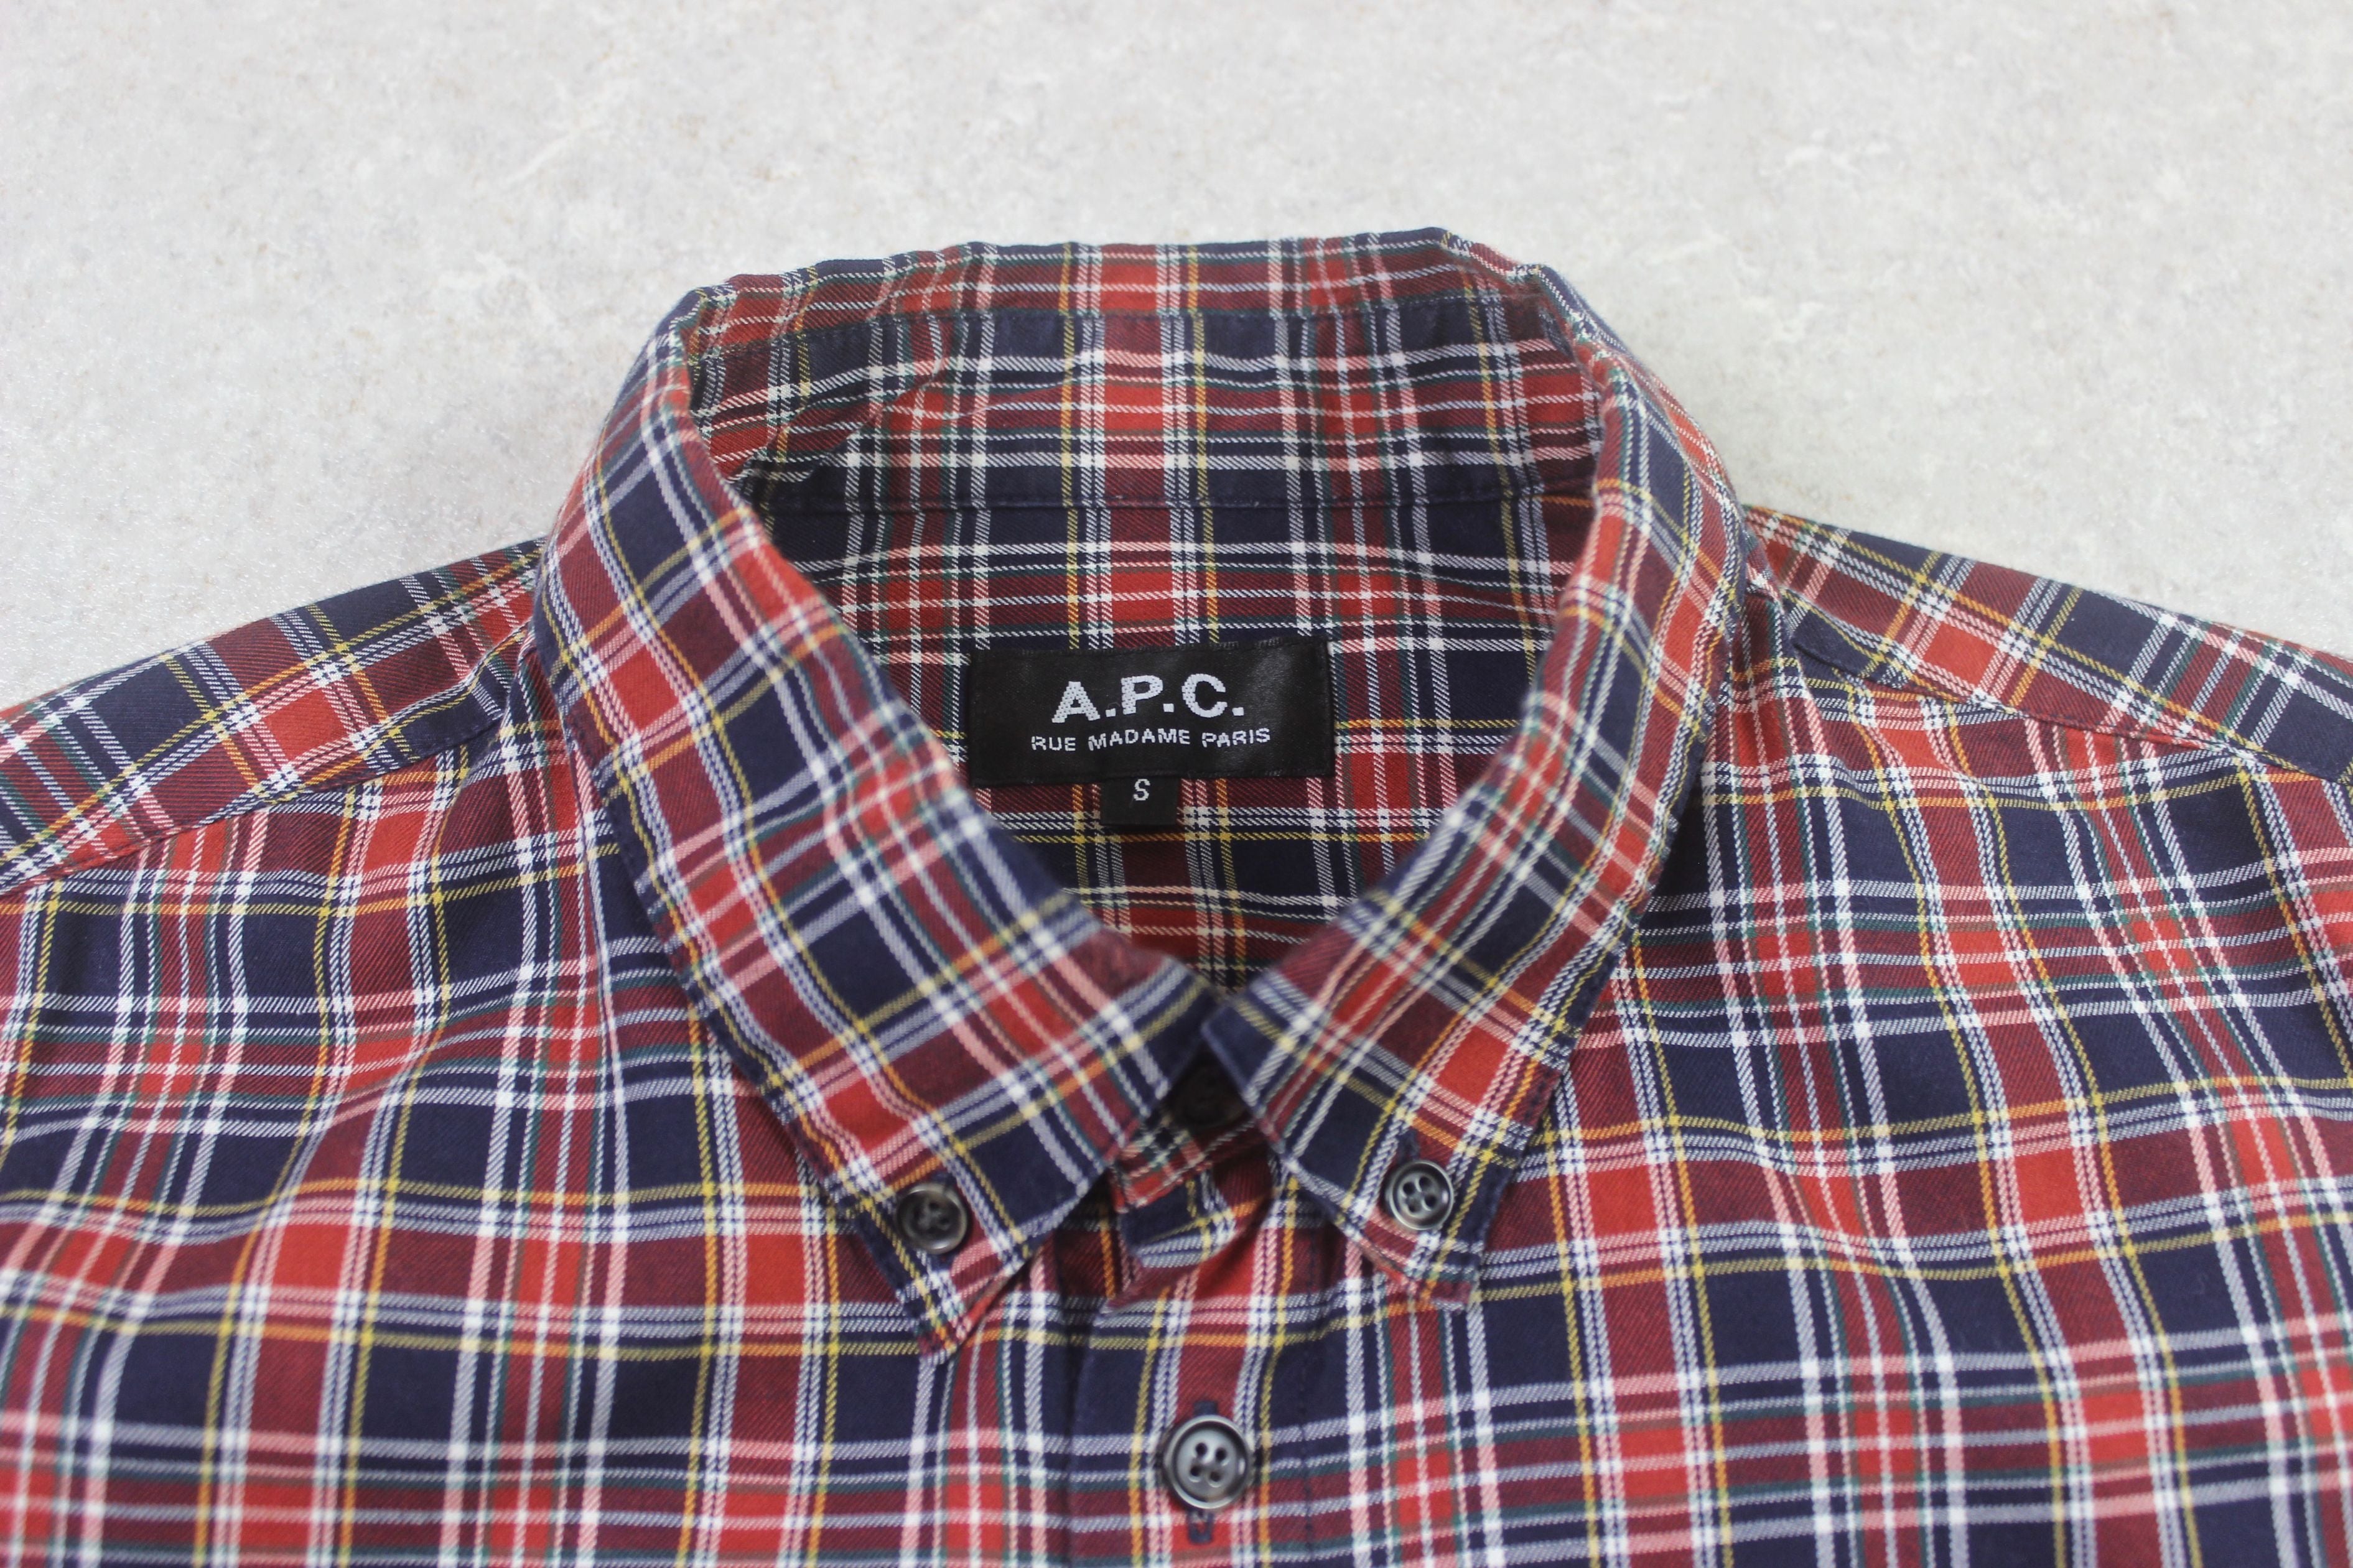 A.P.C. - Shirt - Red/Navy Blue Check - Small